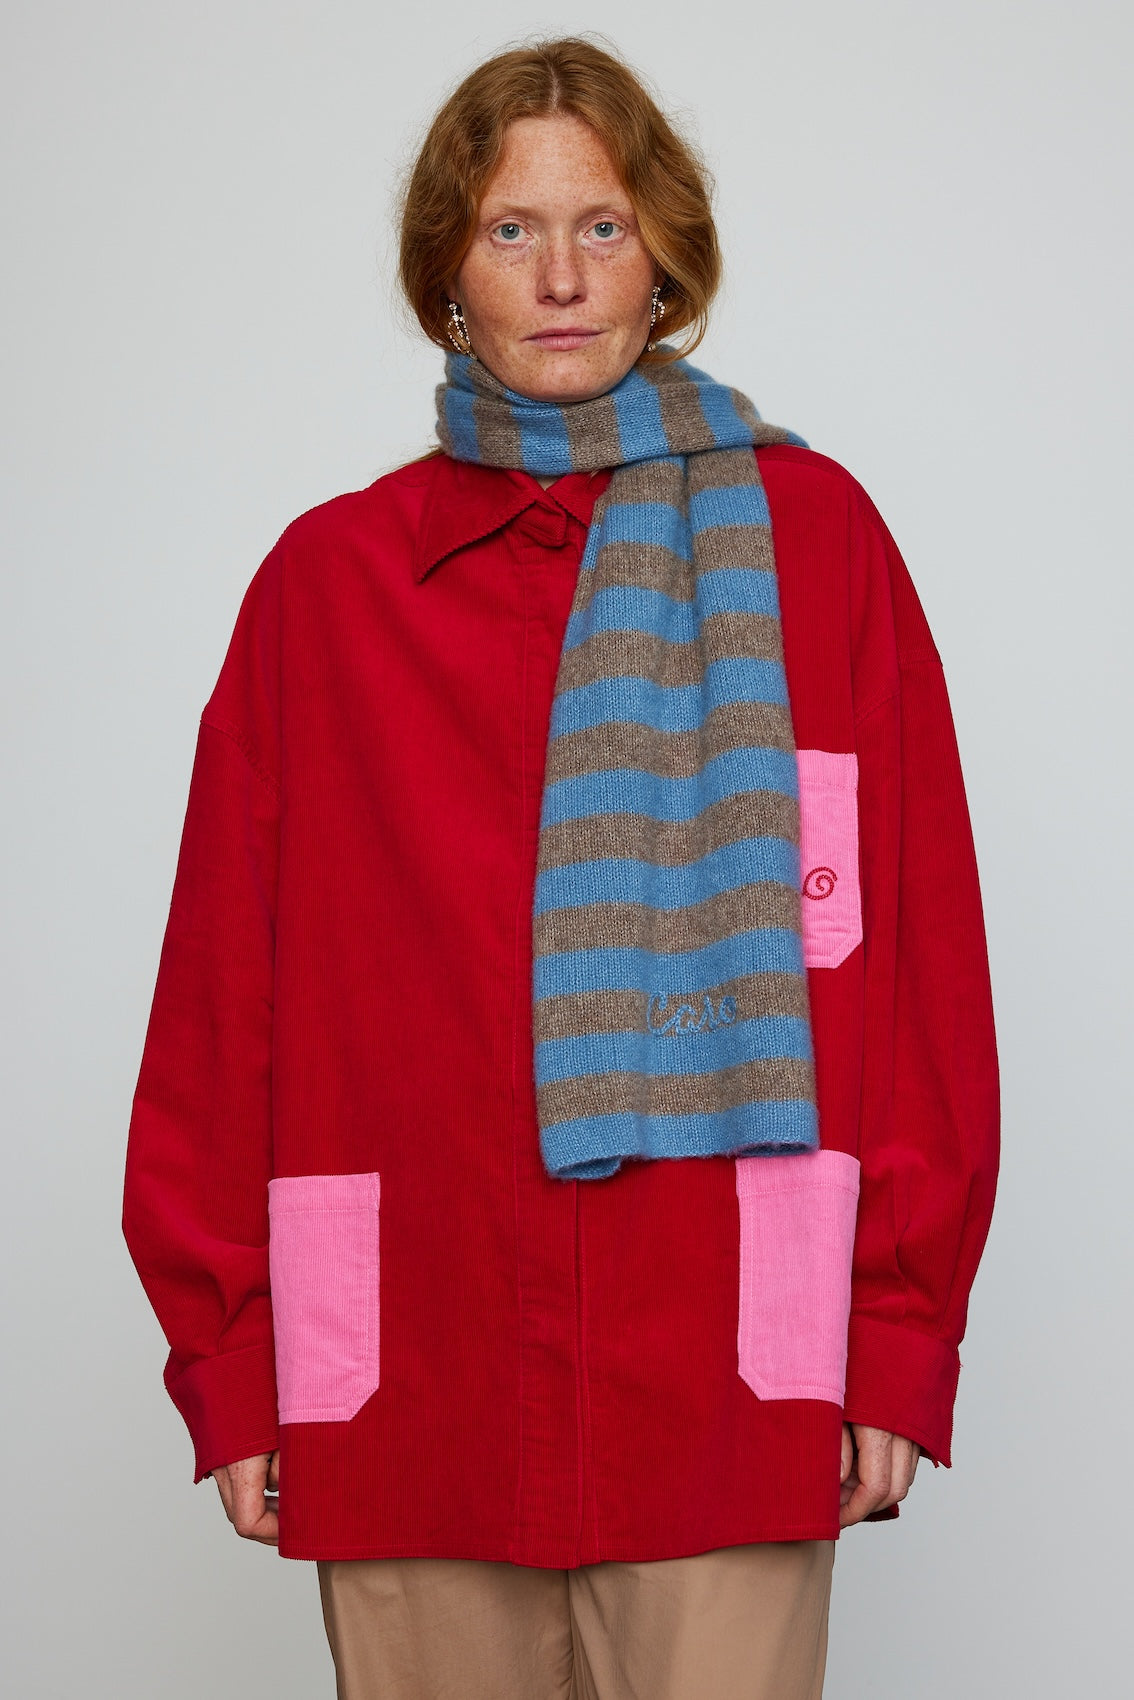 Caro Editions Ultra-soft, light-weight, long scarf made from cashmere silk yarn.   Material: 75% Cashmere, 25% Silk